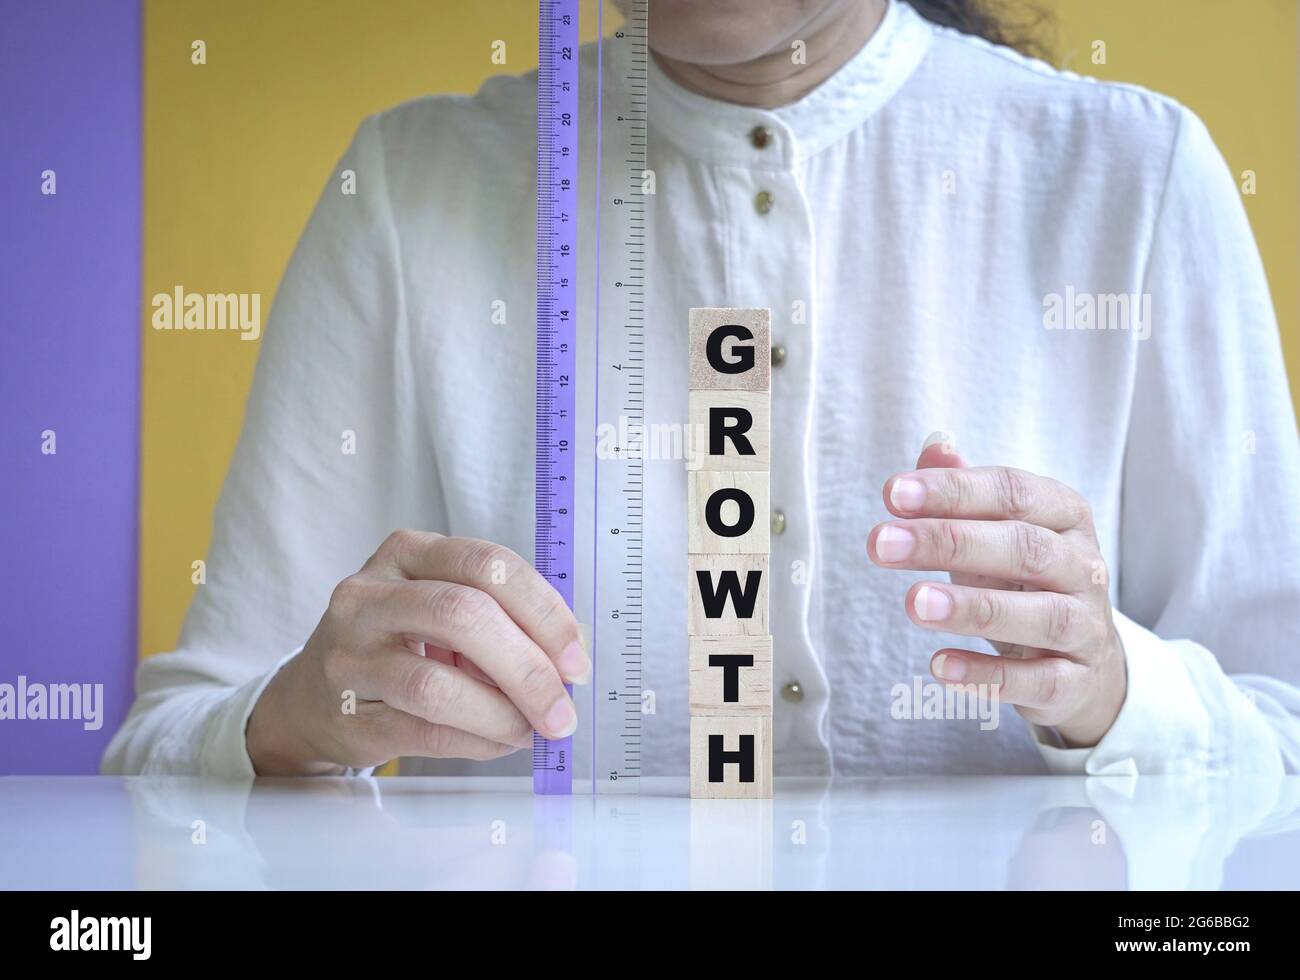 Kid growing measuring with ruler Stock Photo - Alamy